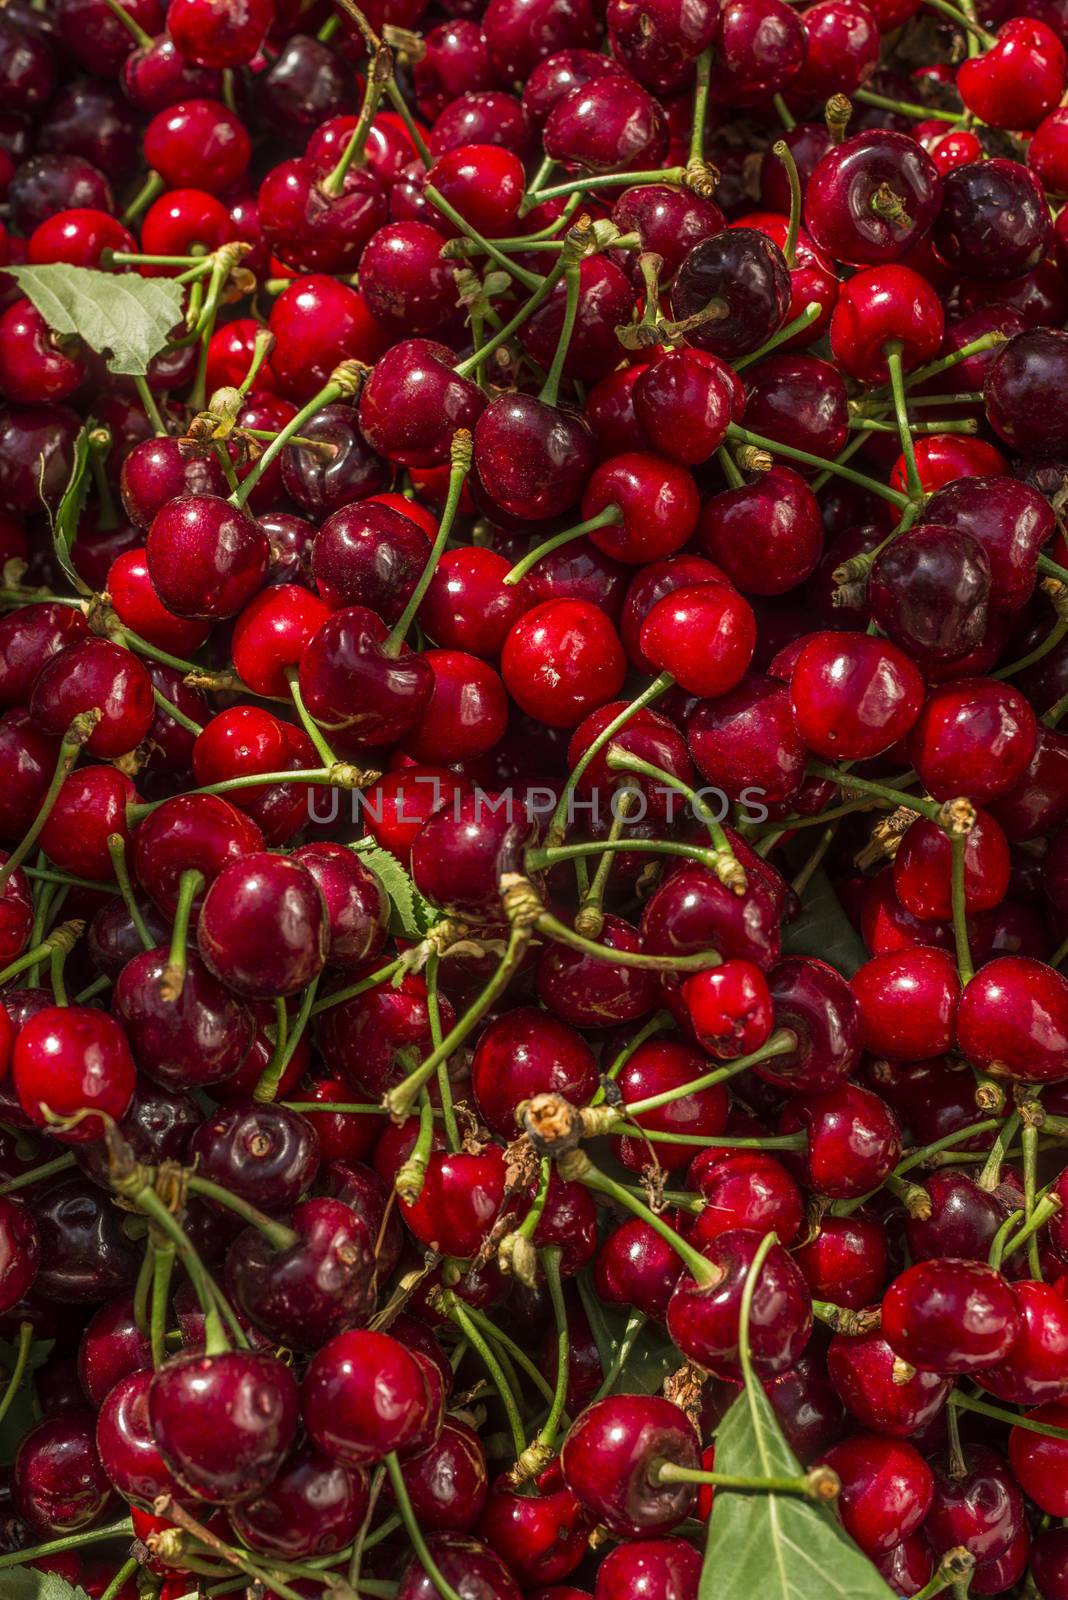 nice coloured cherries. flash used to get nice light spots on the berries